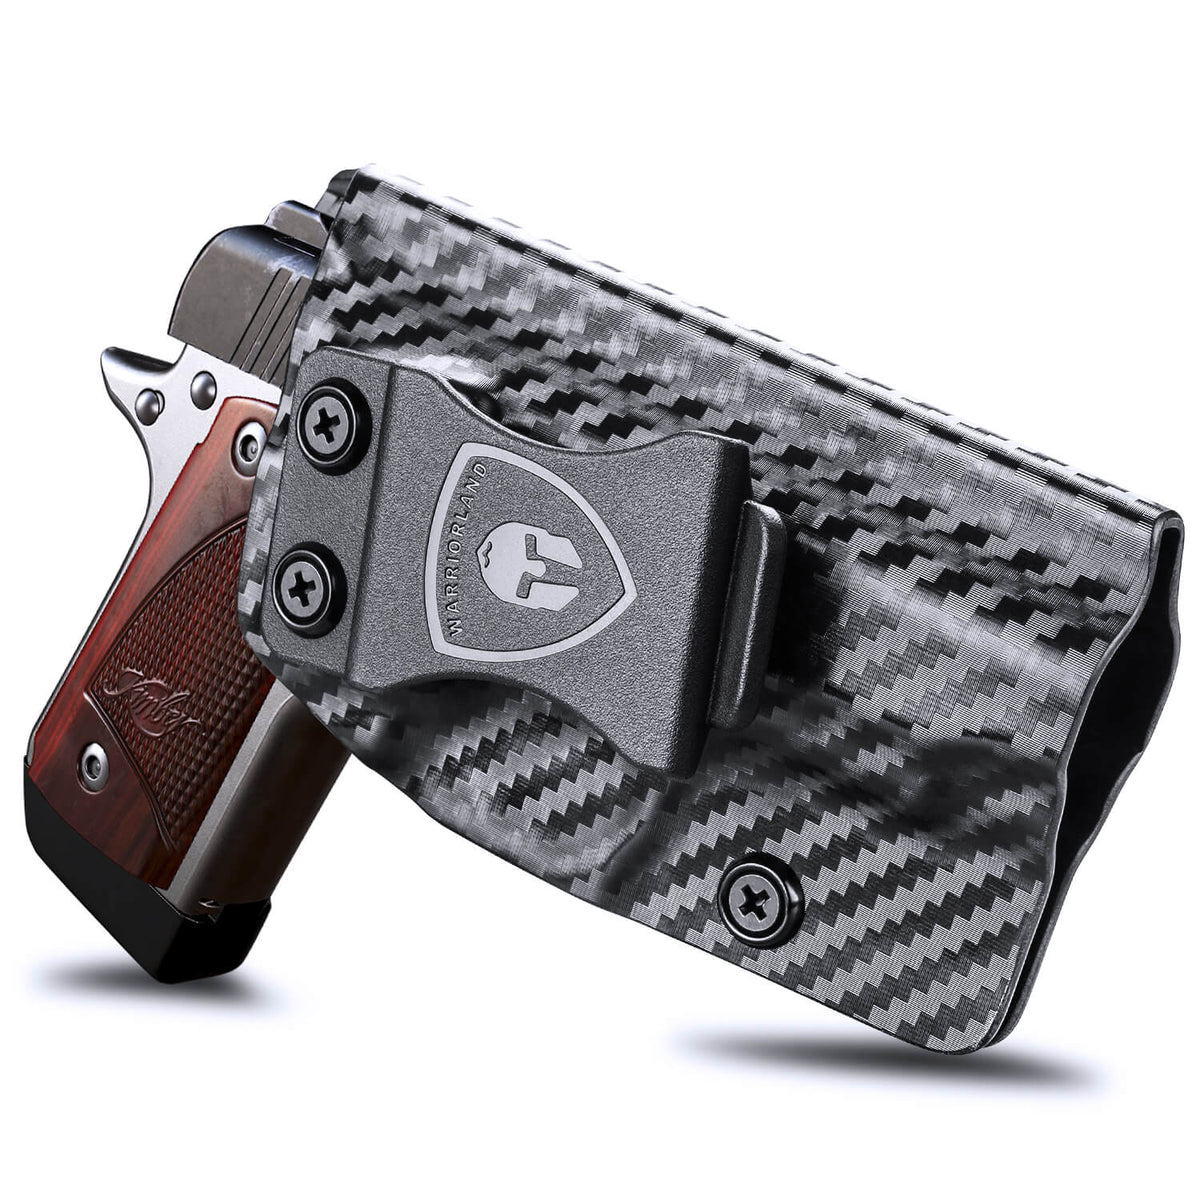 Carbon Fiber Kydex IWB Holster for Kimber Micro 9 9mm Pistol Concealed Carry | WARRIORLAND